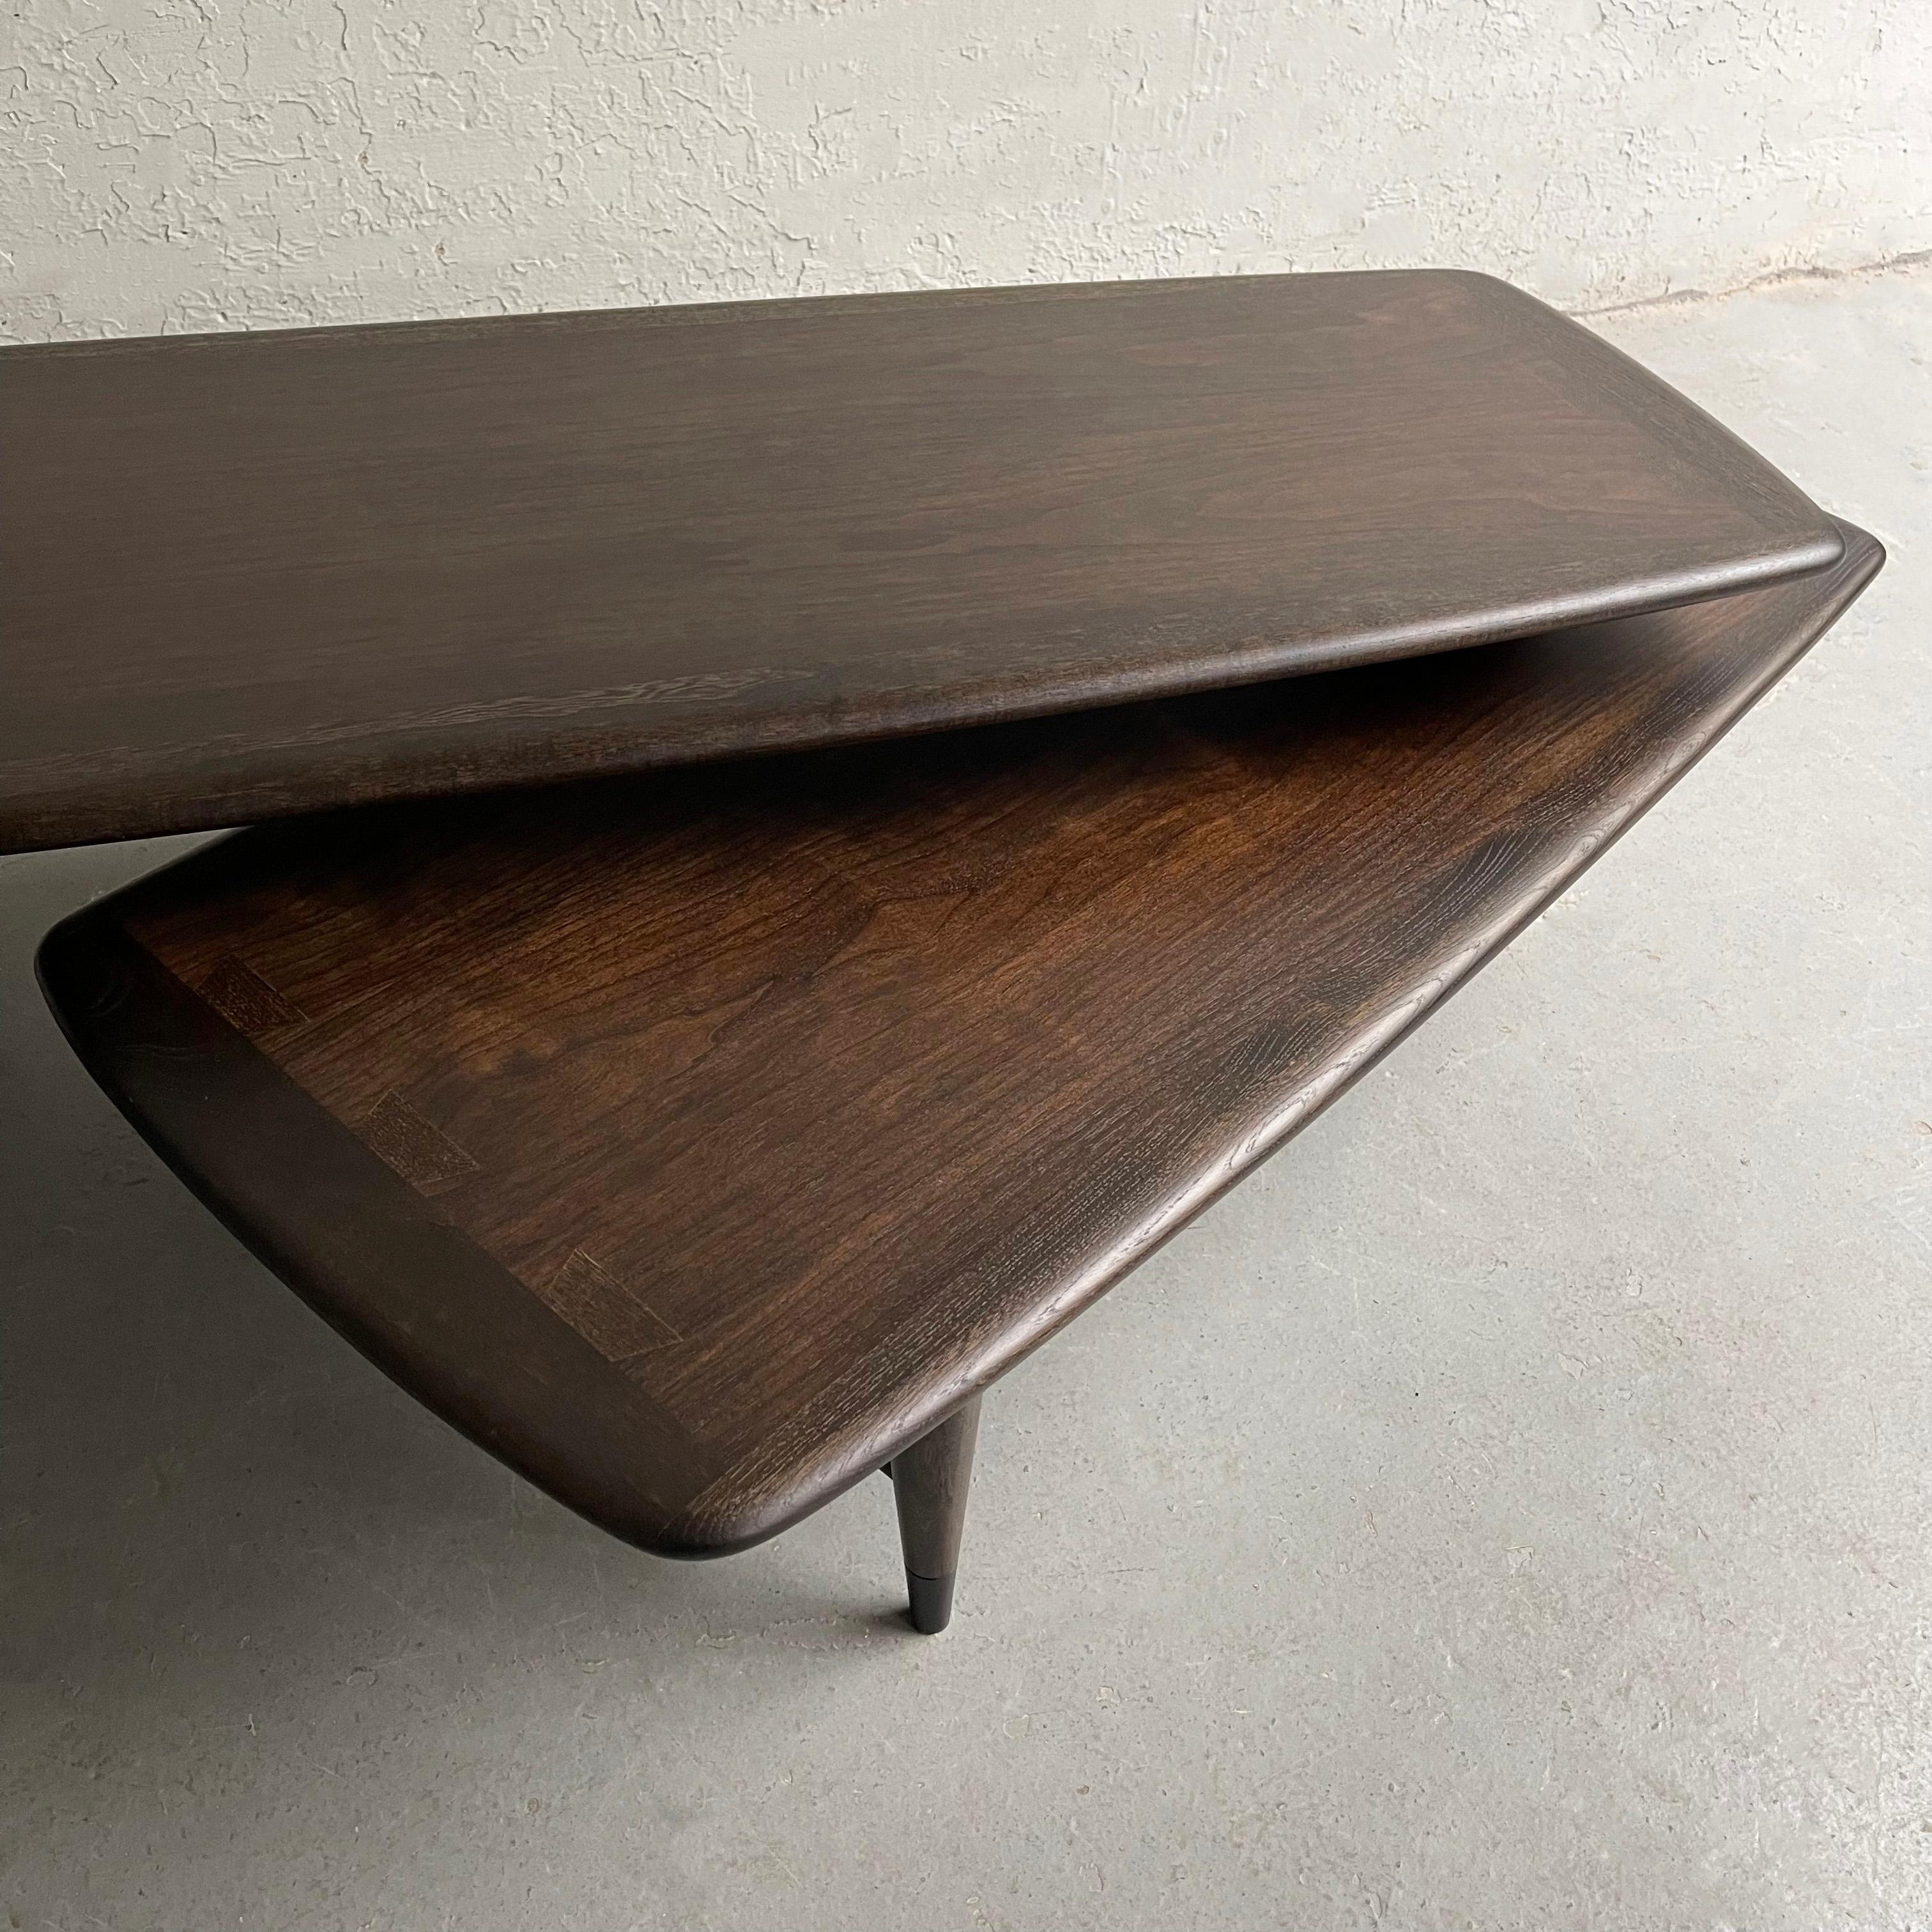 American Mid-Century Modern Switchblade Coffee Table by Lane Acclaim